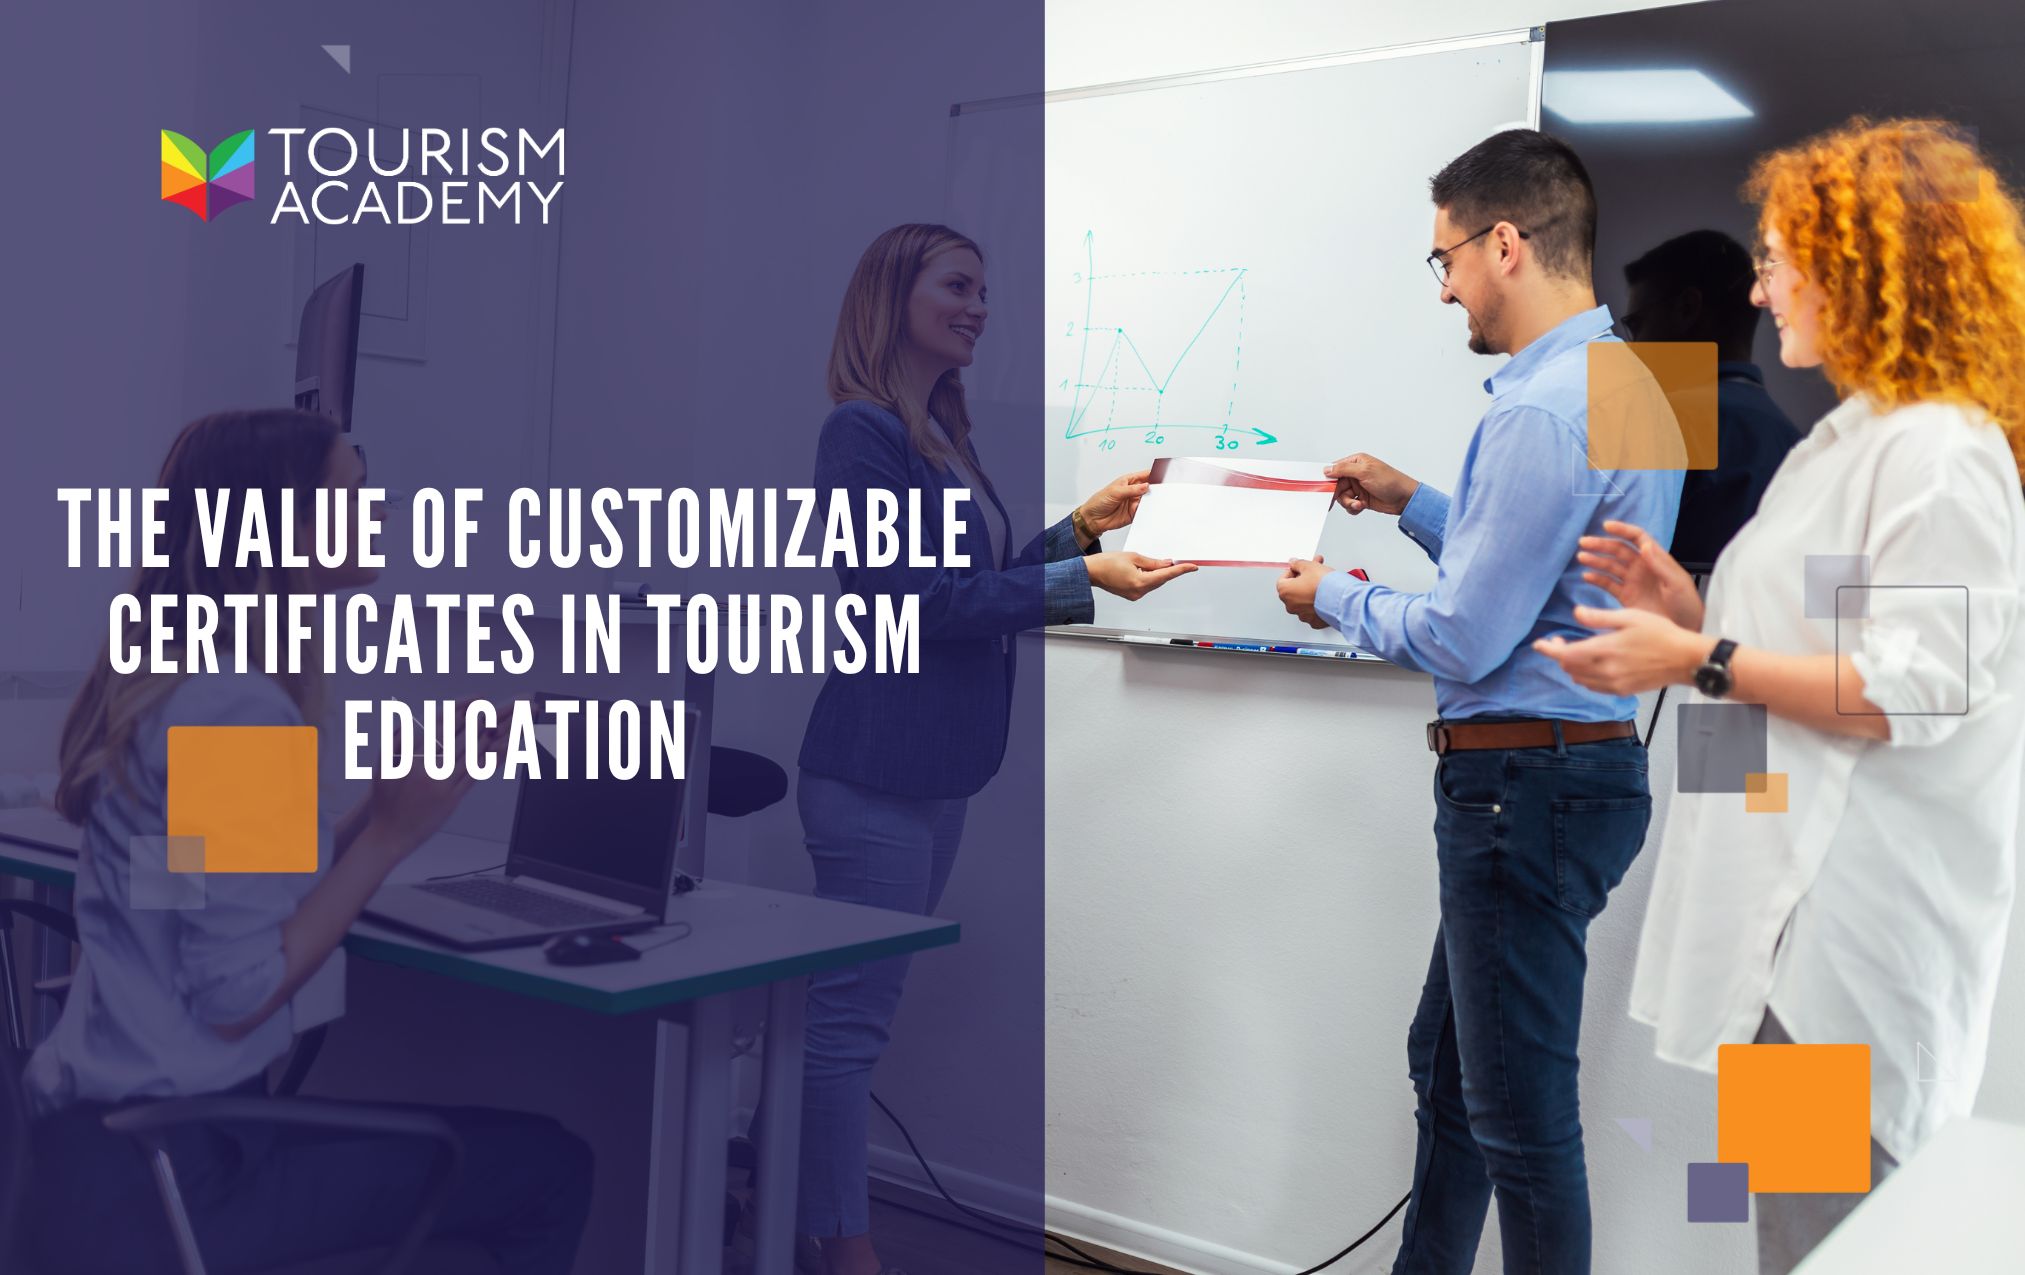 The Value of Customizable Certificates in Tourism Education